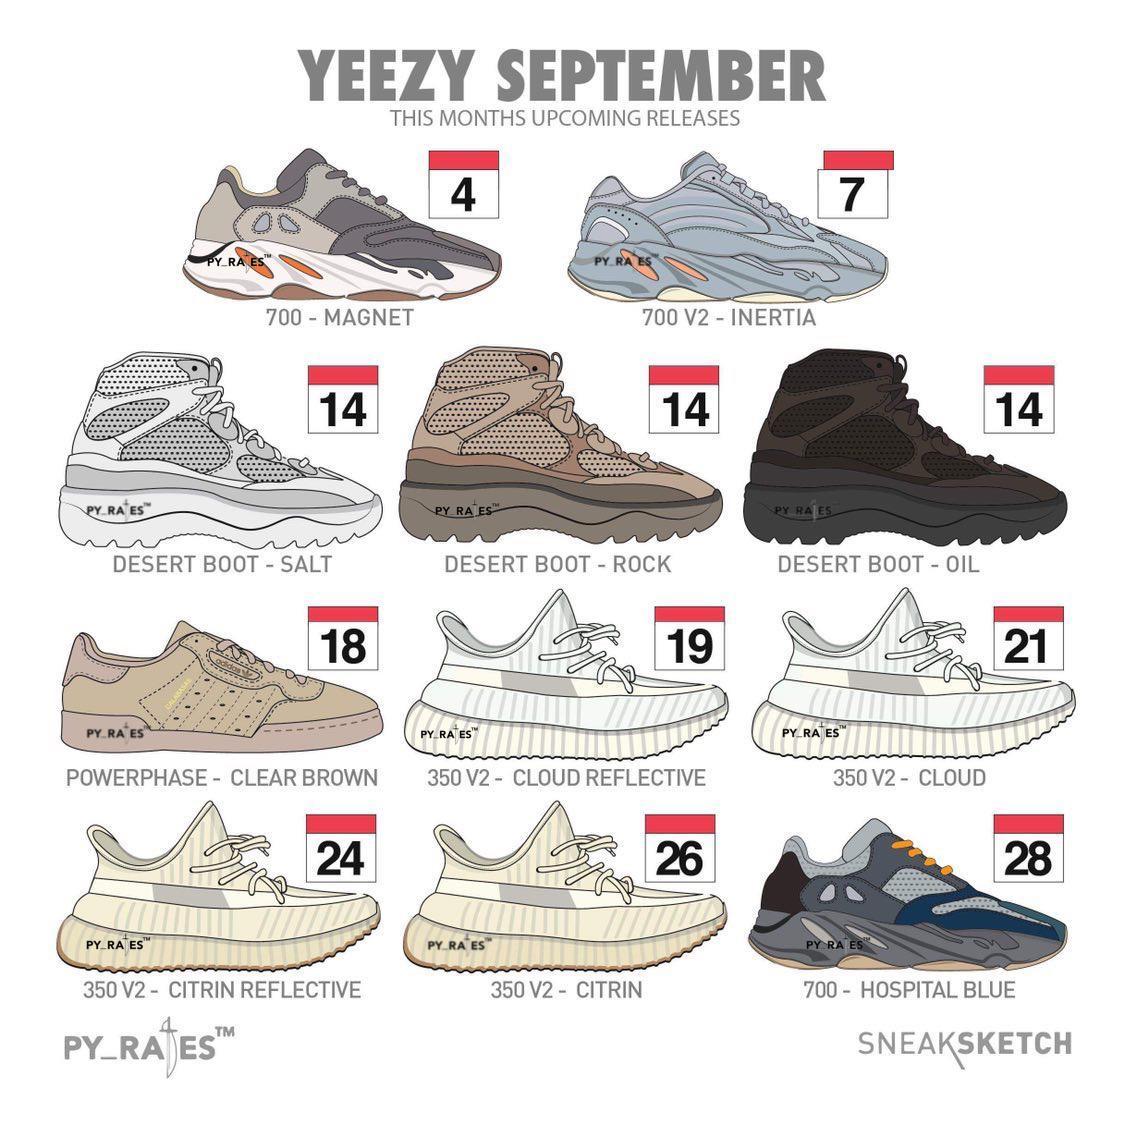 when do yeezys come out